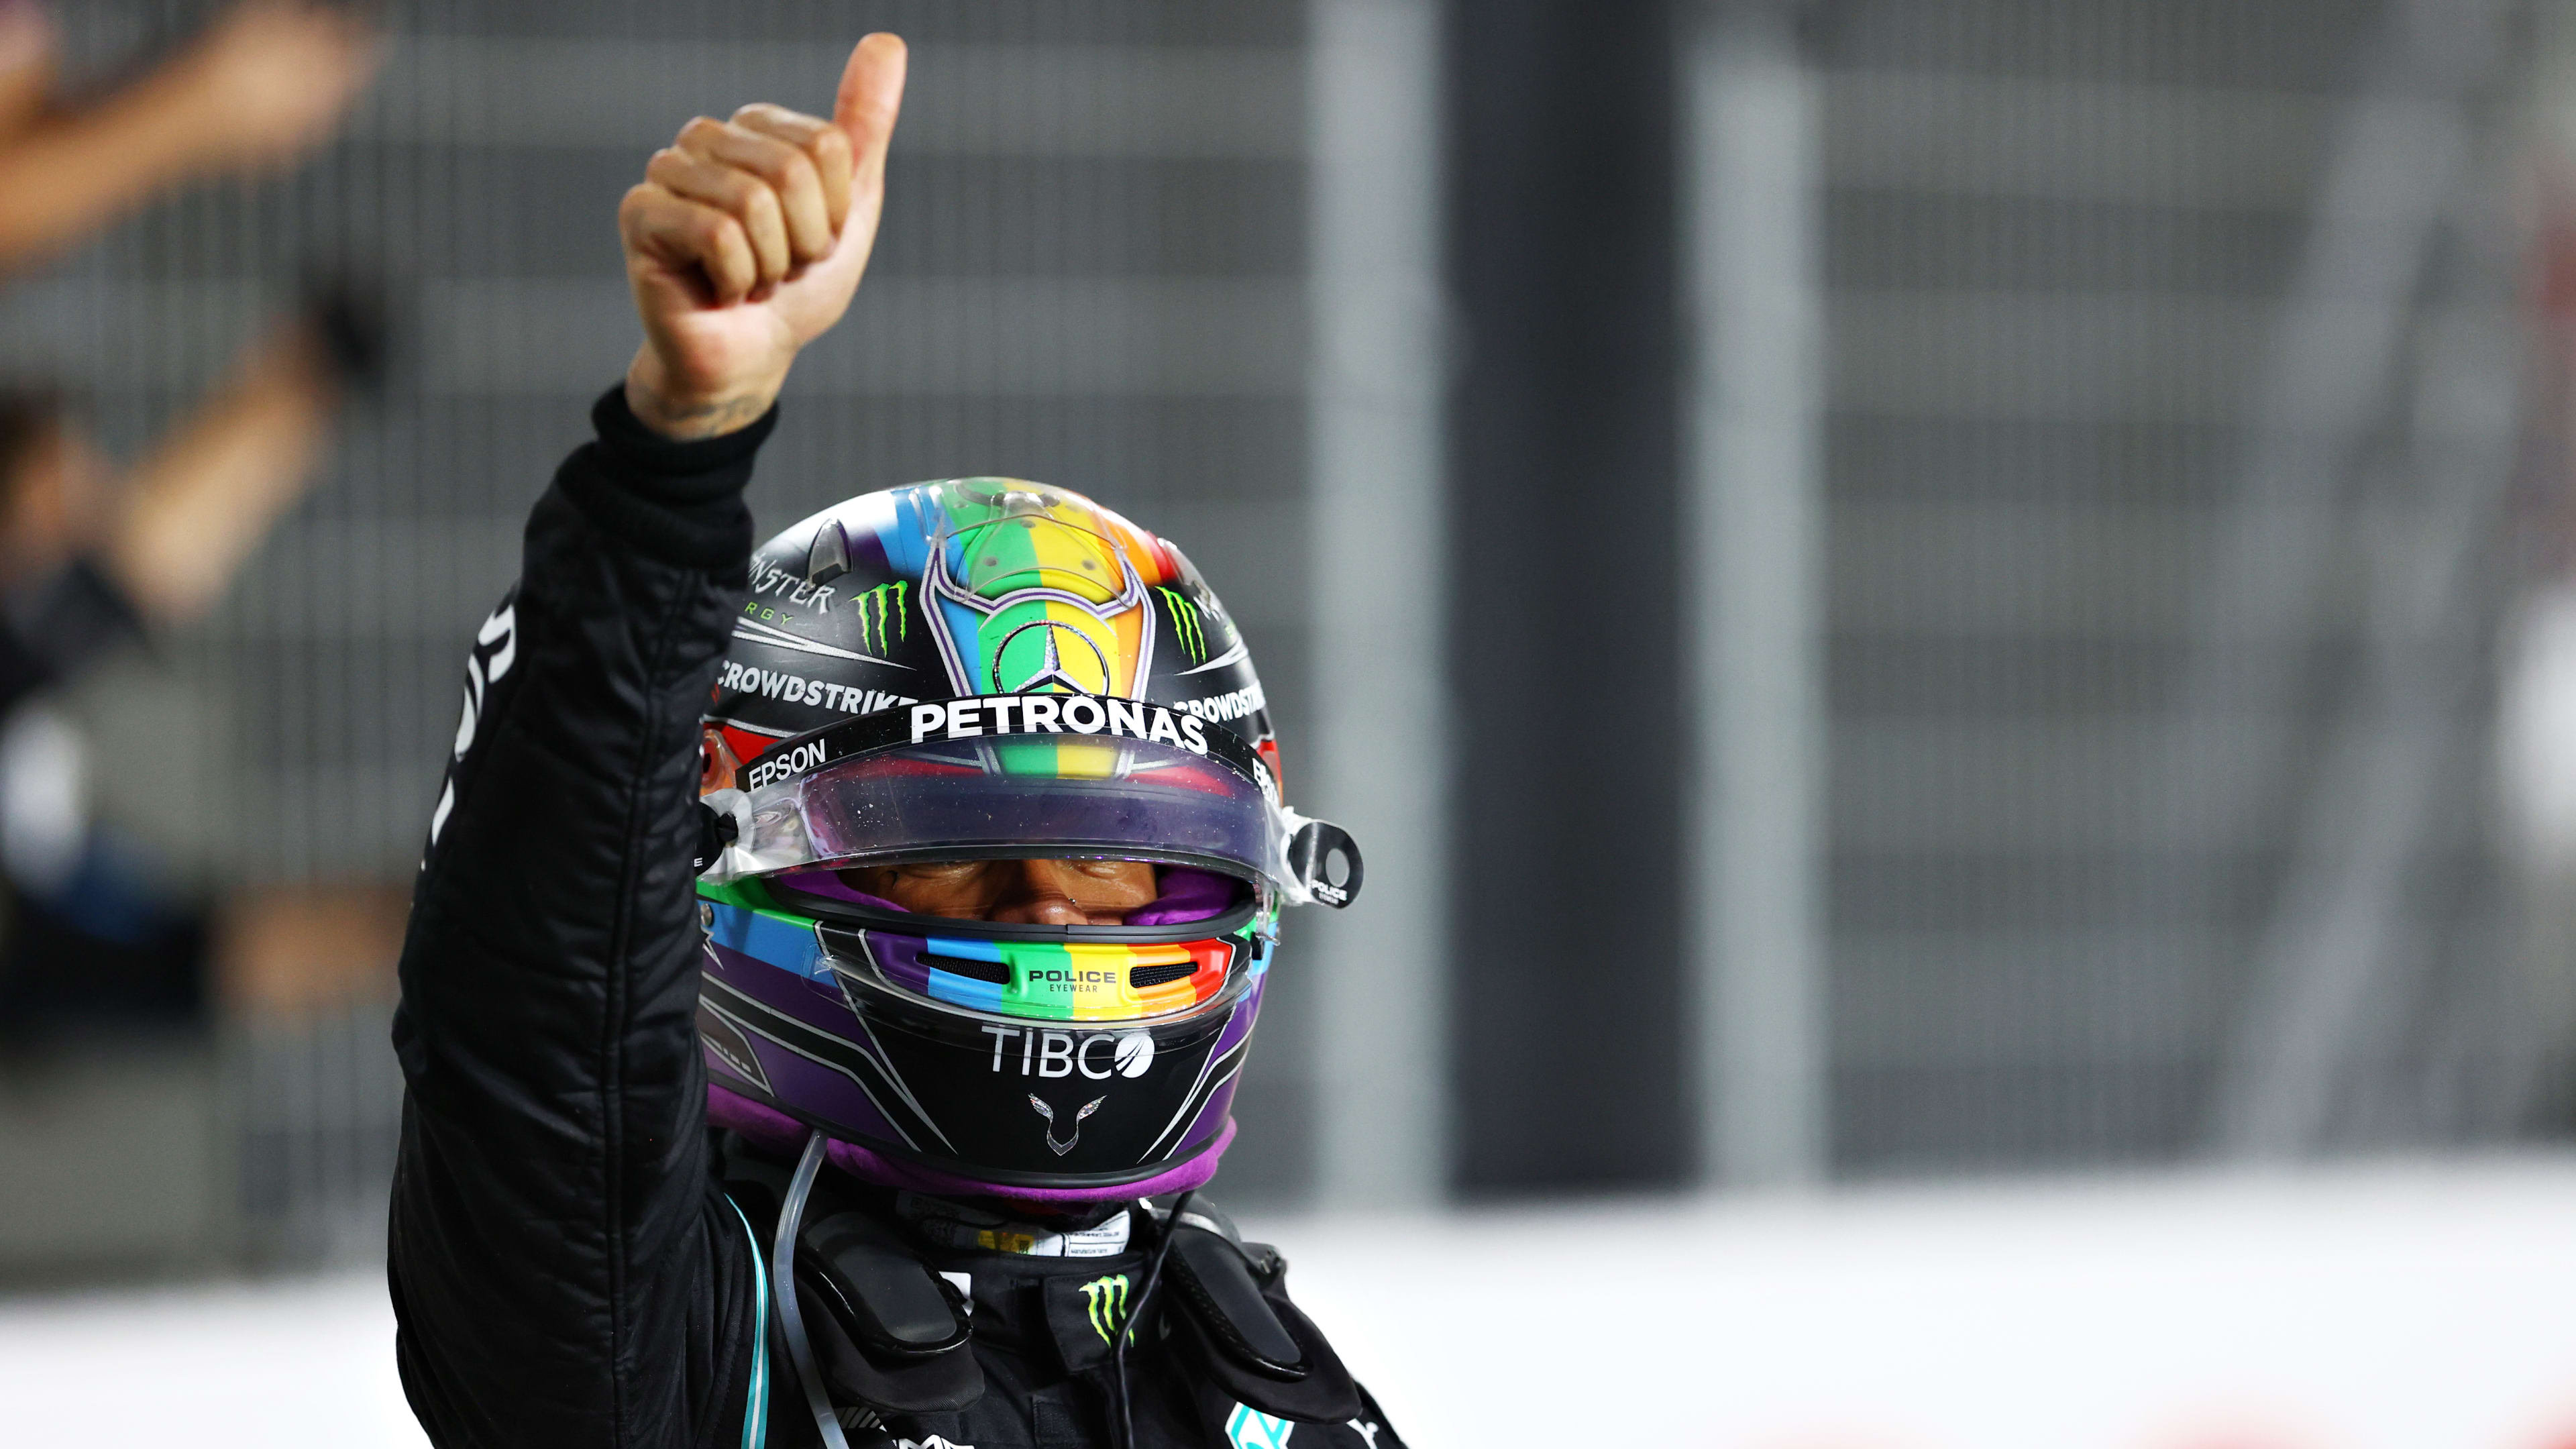 2021 Qatar Grand Prix race report & hightlights: Hamilton narrows Verstappen’s title lead with Qatar win as Alonso takes first podium of F1 comeback | Formula 1®